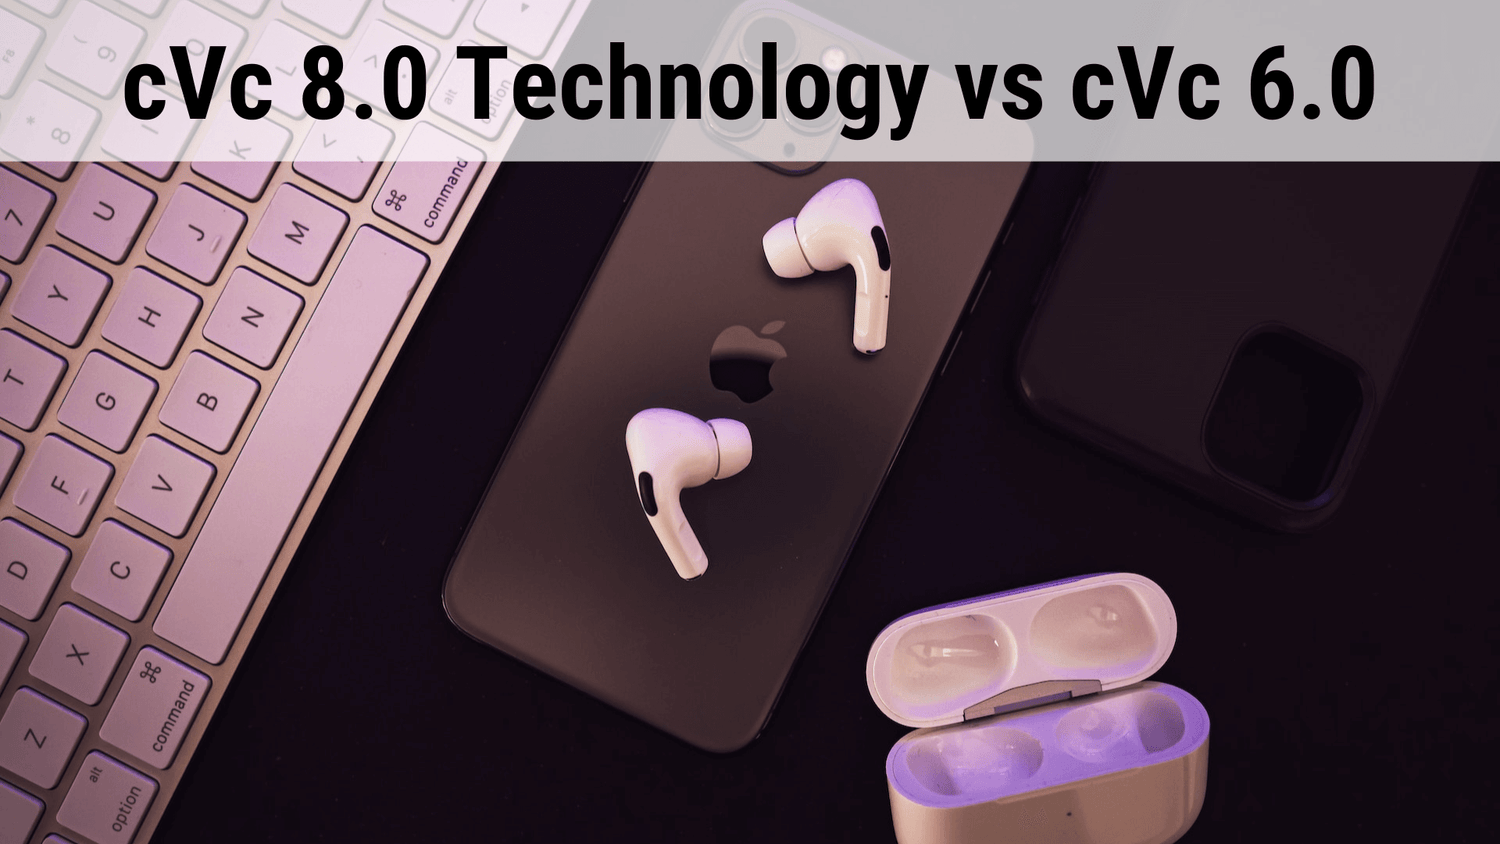 cVc 8.0 Technology vs cVc 6.0: What is the Difference?